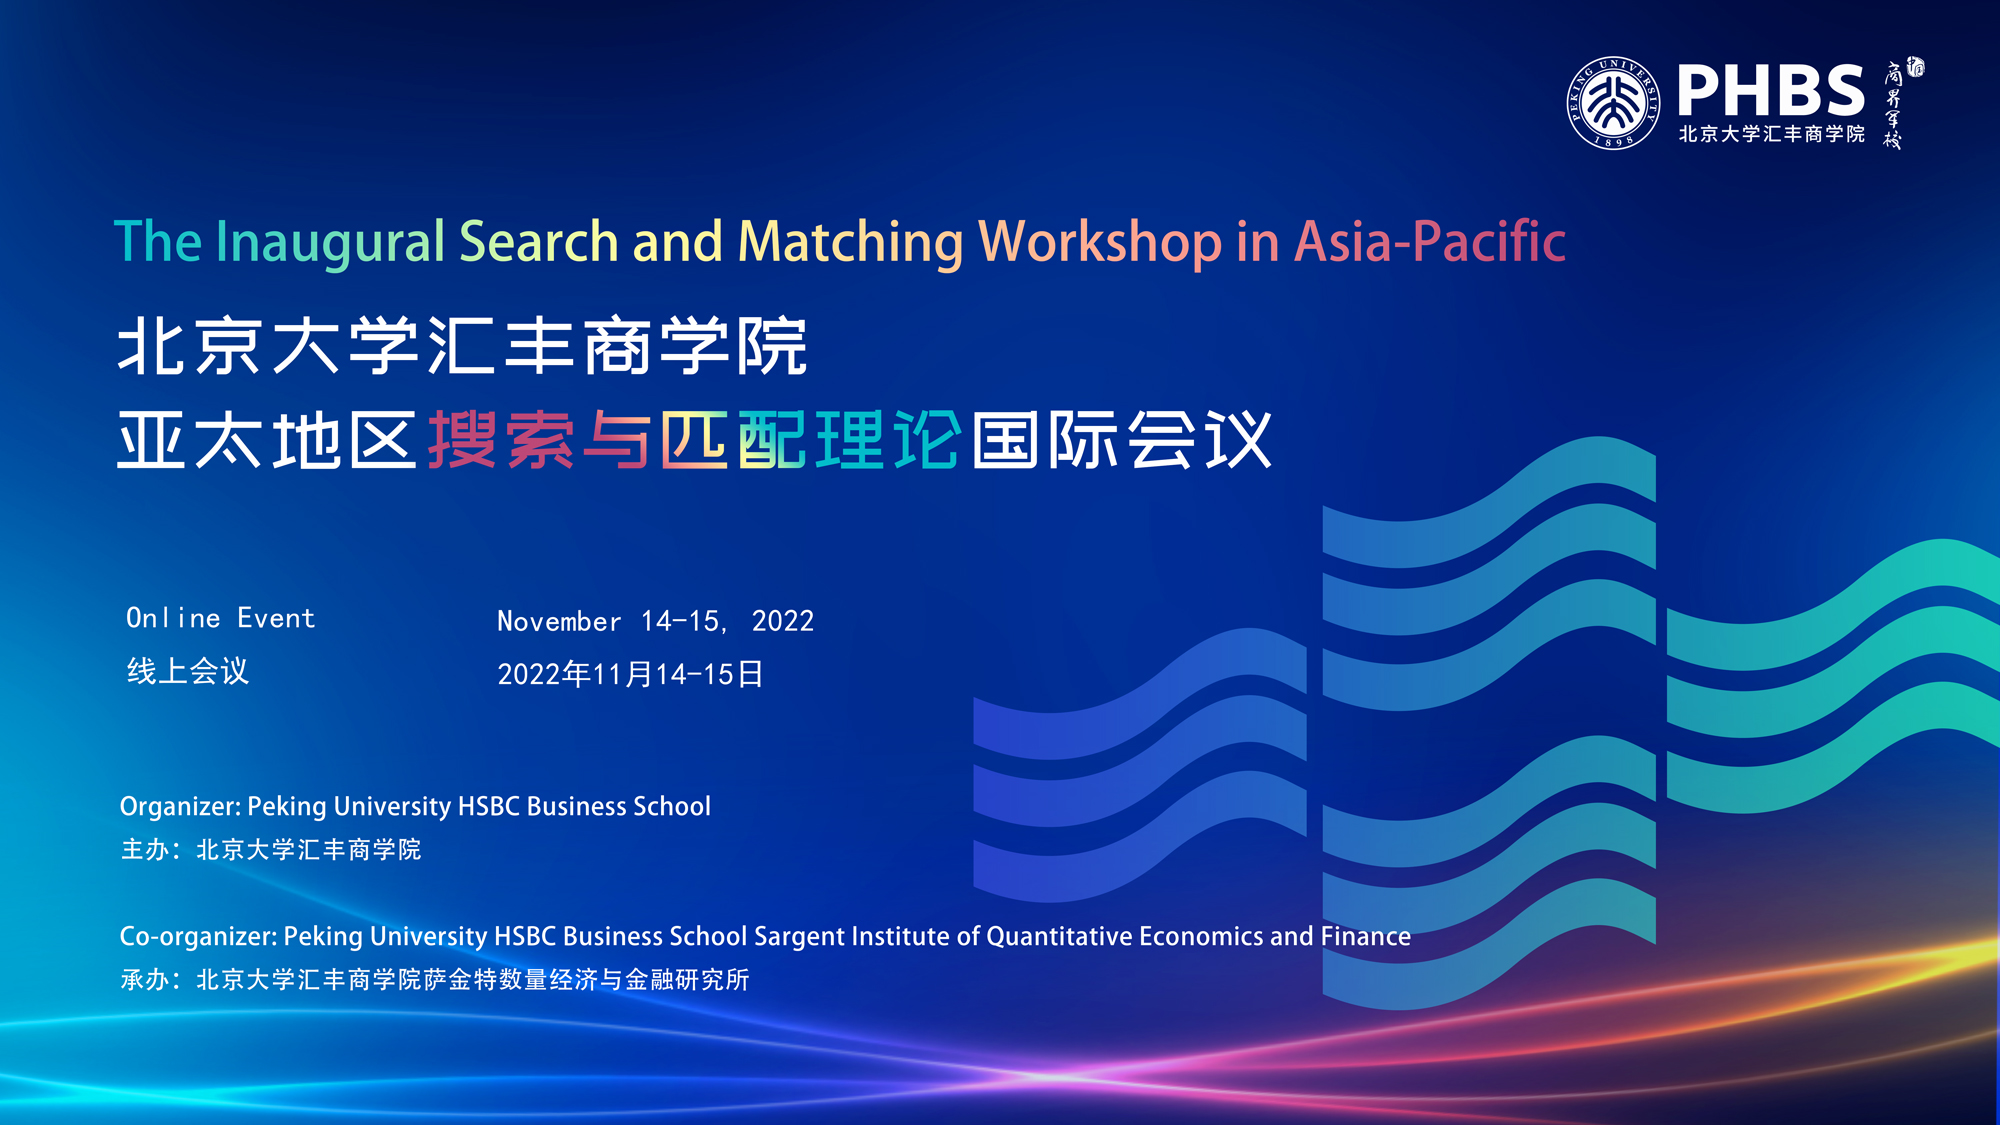 PHBS holds Inaugural Search and Matching Workshop in Asia-Pacific